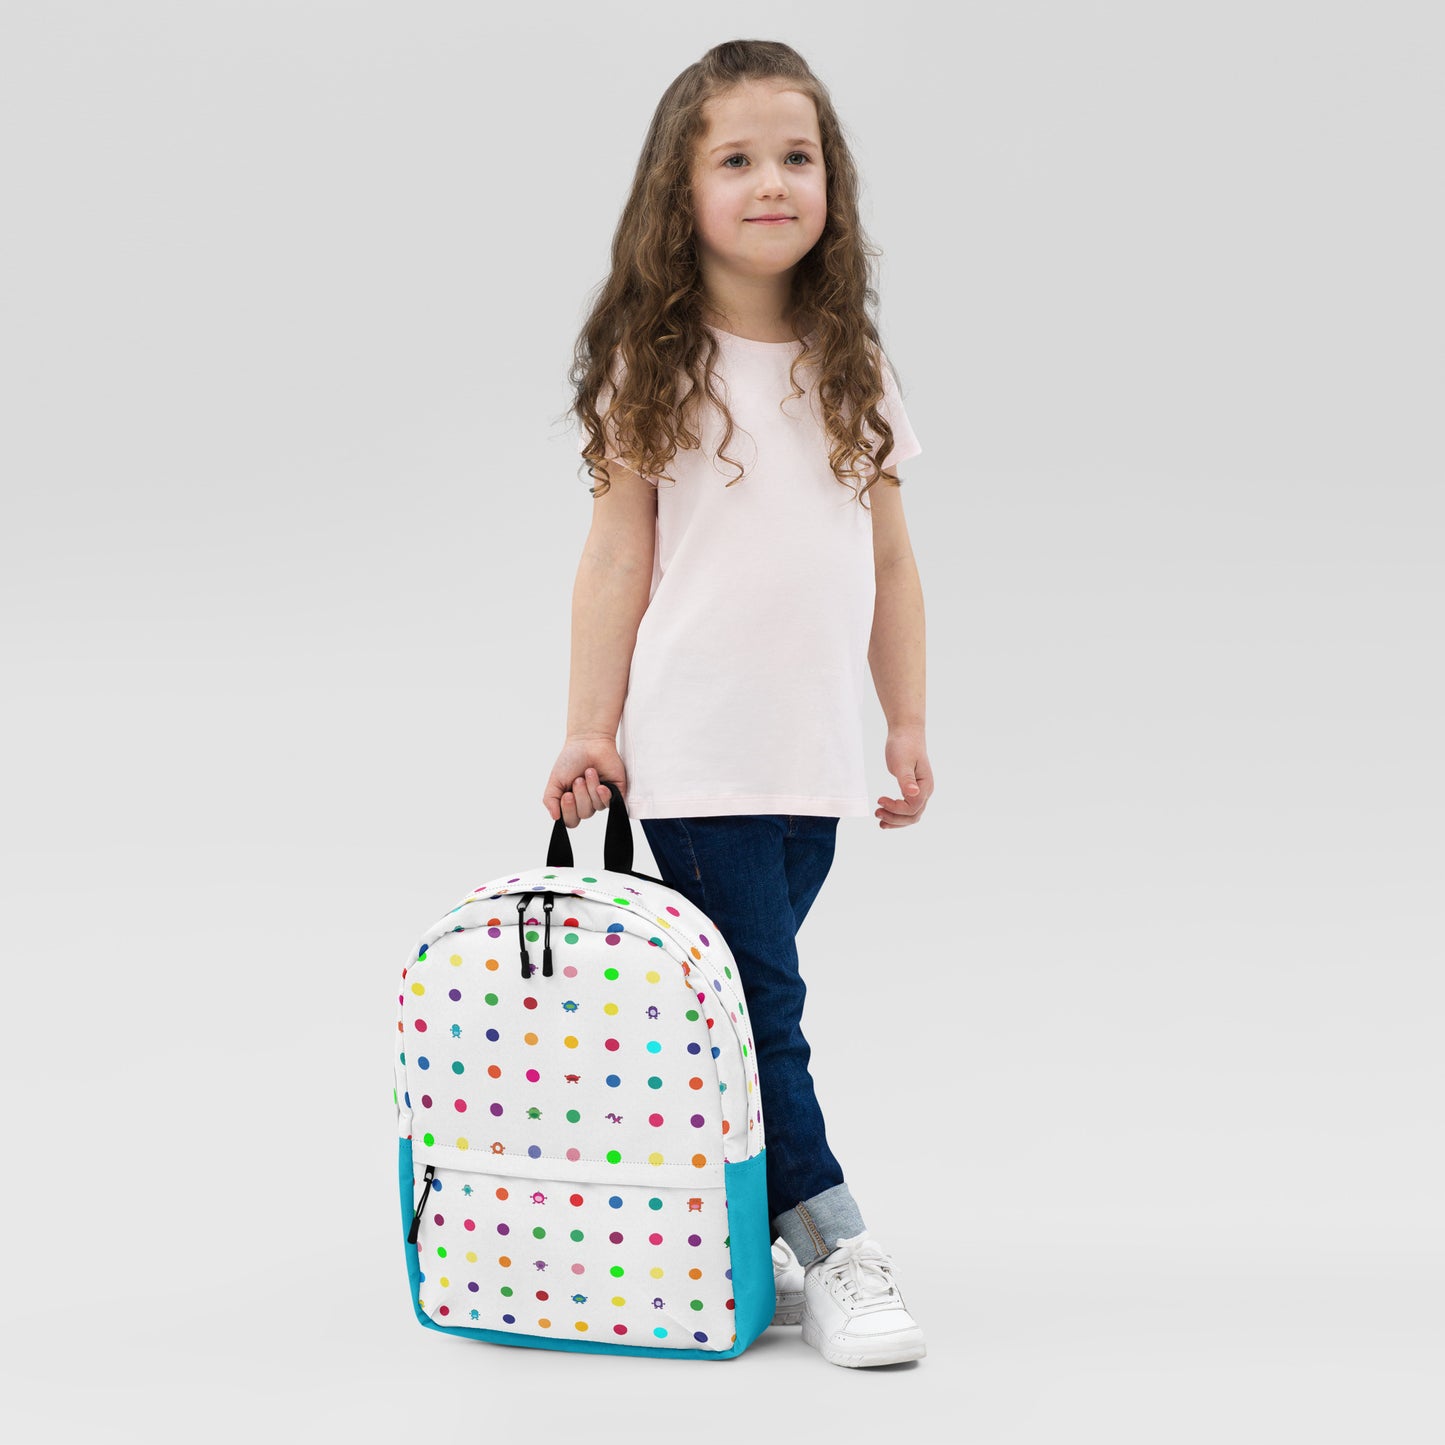 White Turquoise Small Dot Monster Backpack with zip pocket young girl